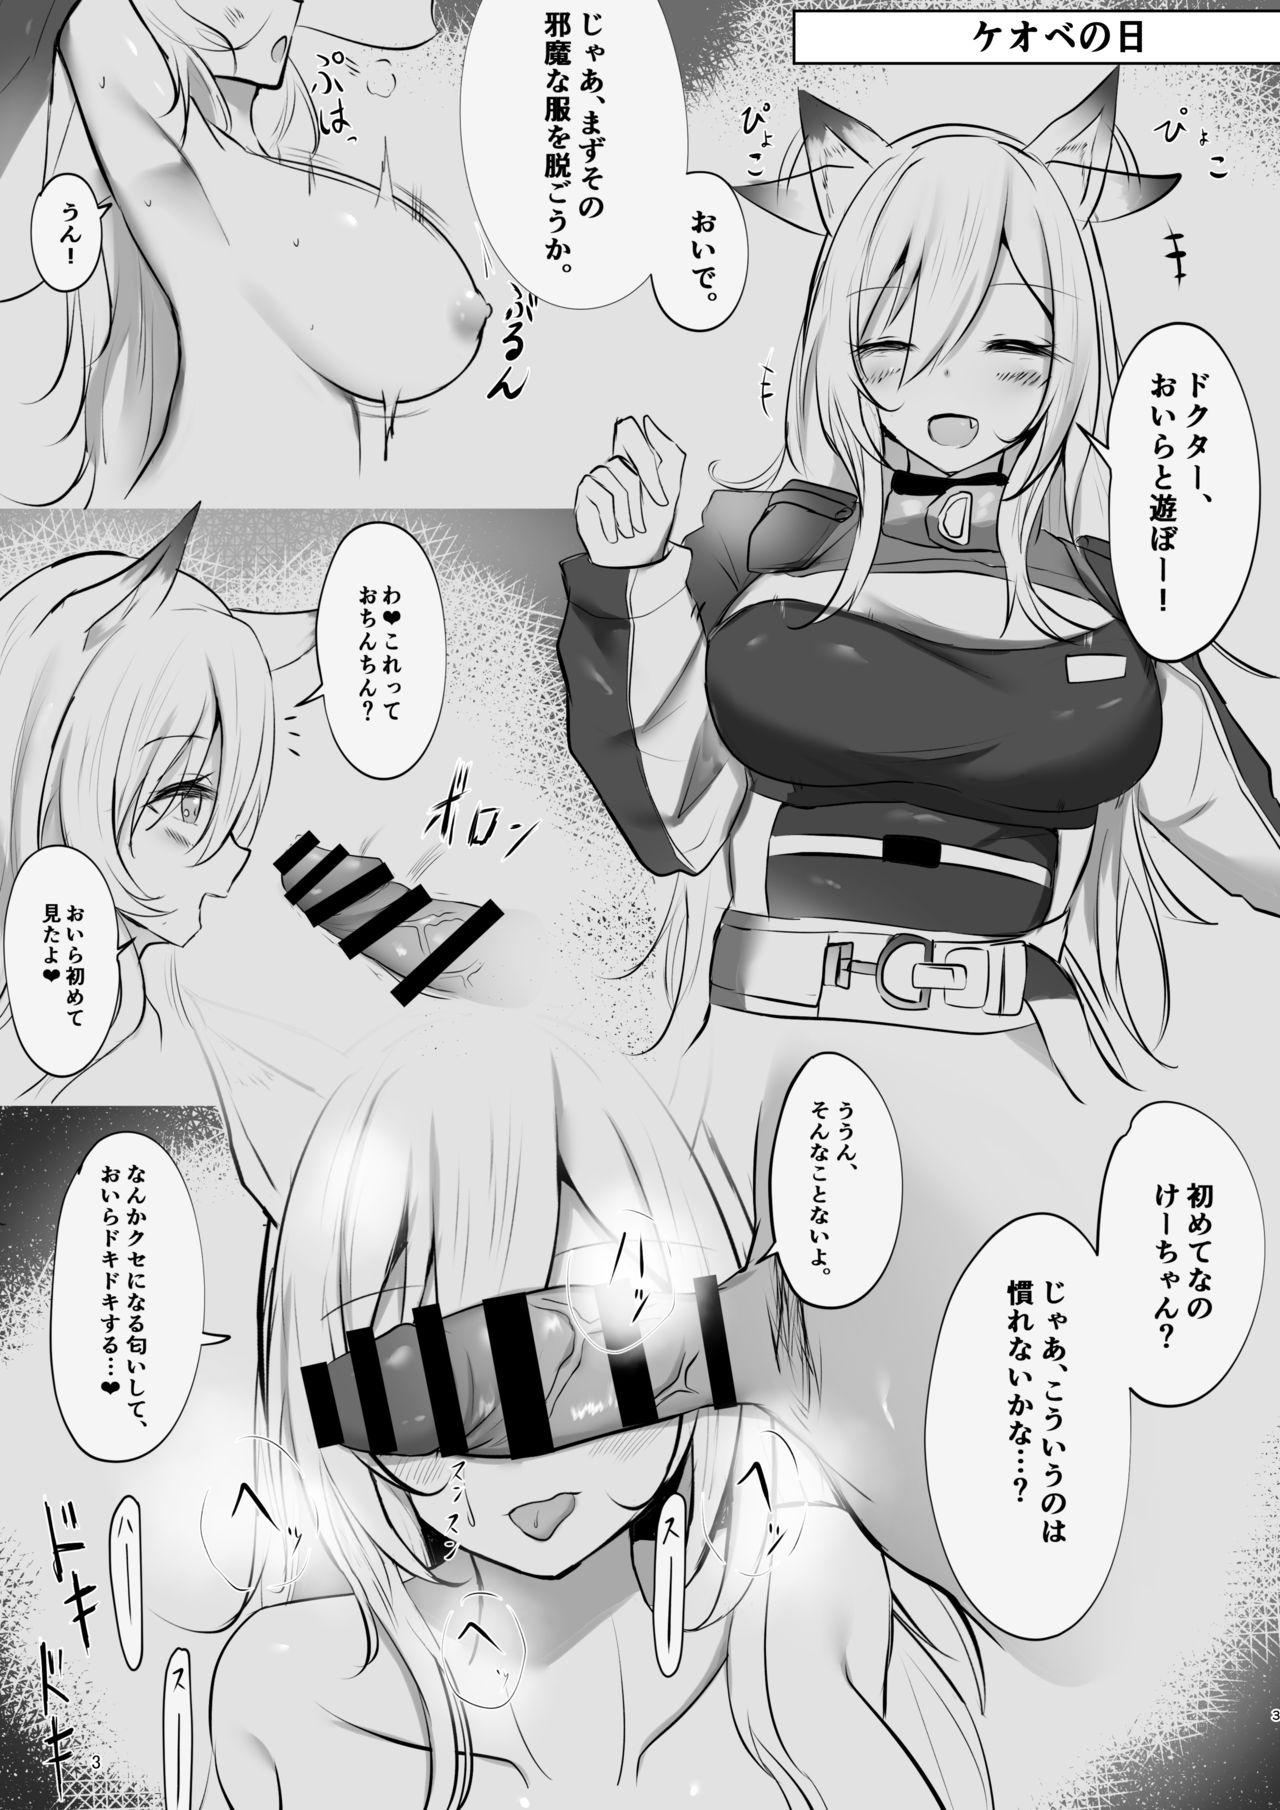 Missionary 夜な夜な扇情作戦記録 - Arknights 4some - Page 3